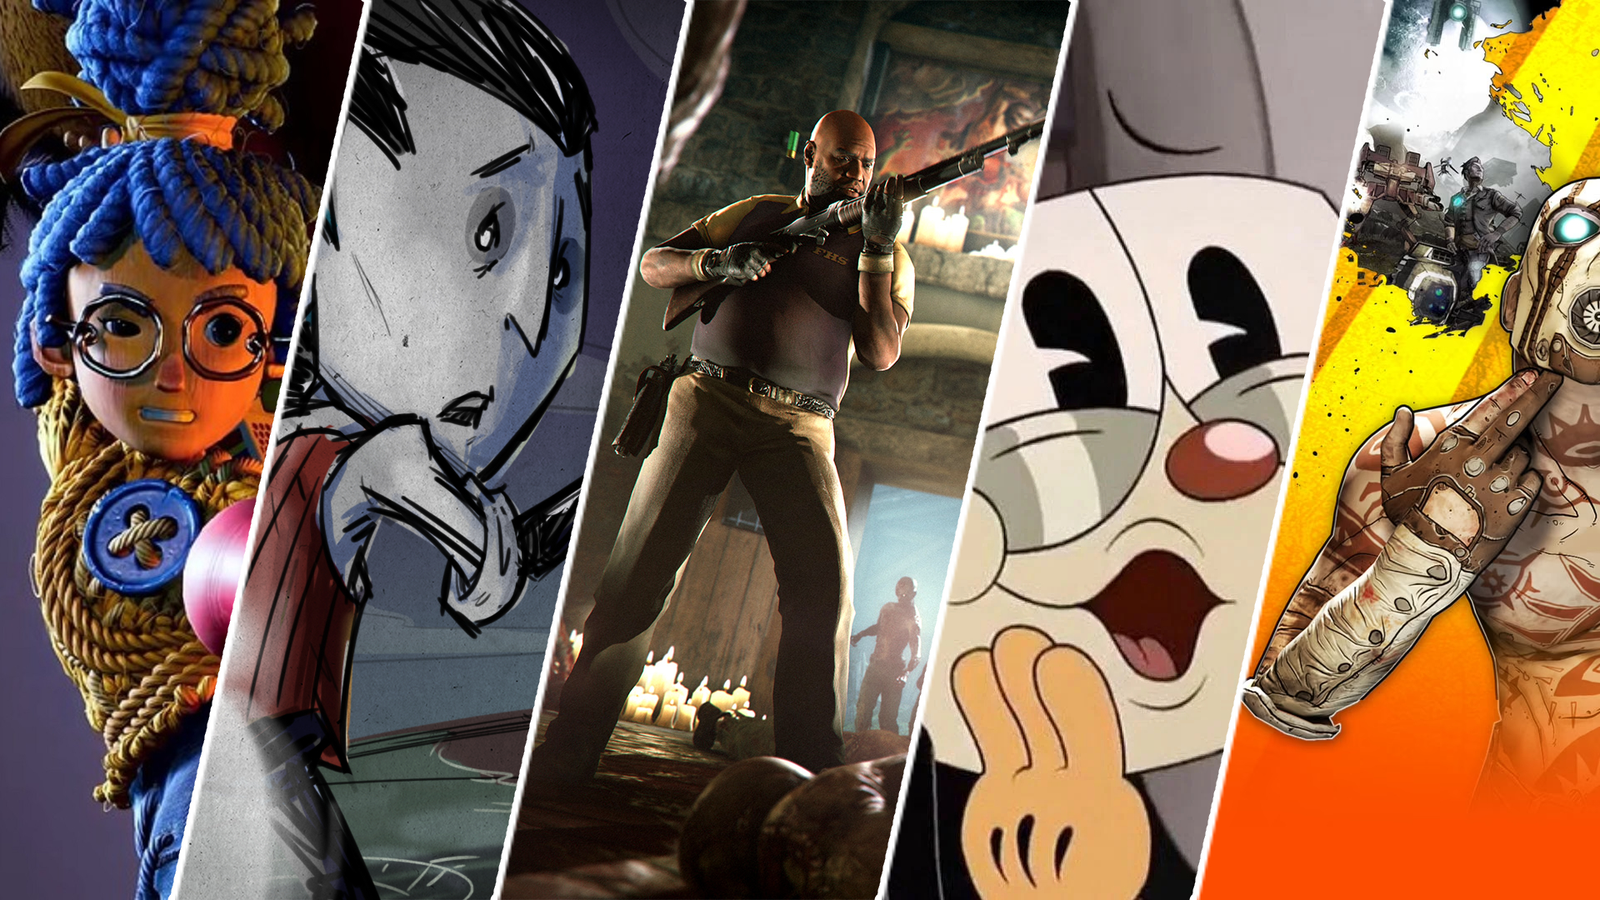 The best free games you can play right now (on every platform)